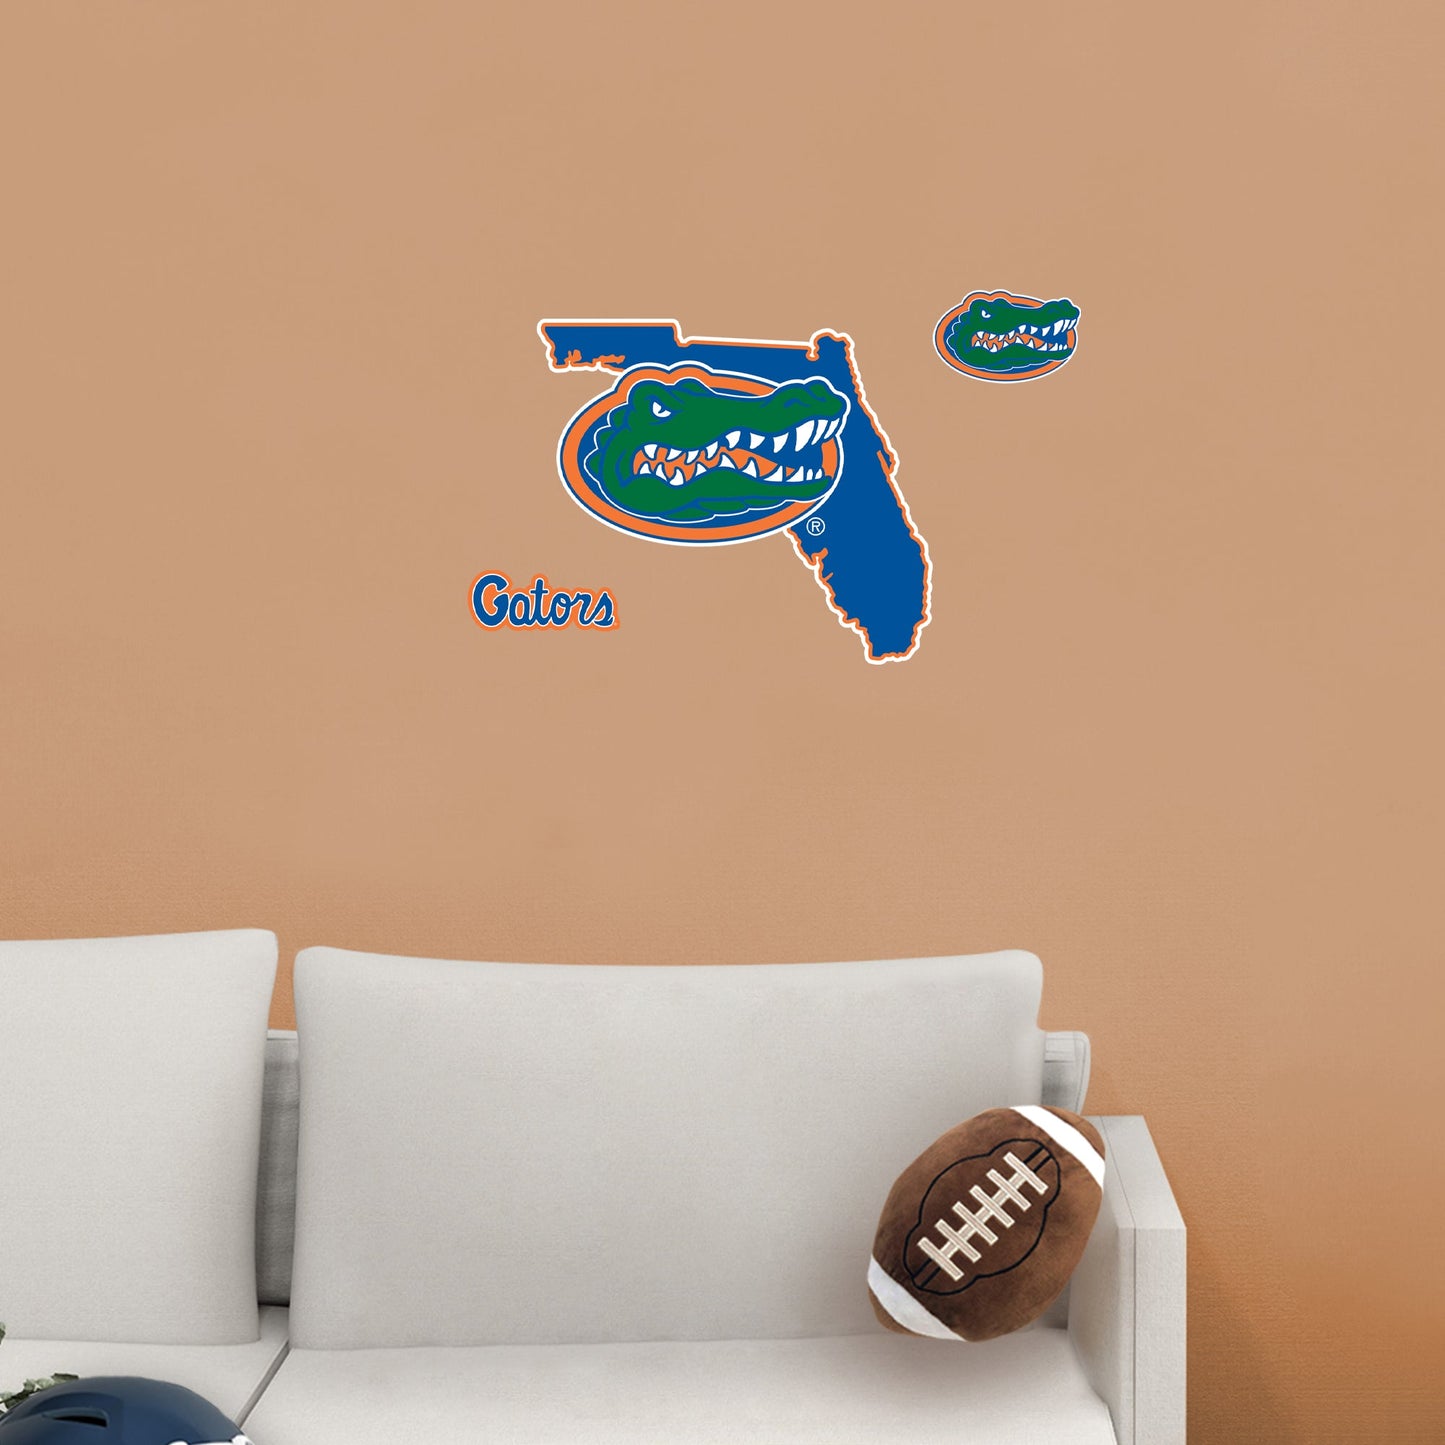 Florida Gators: State of Florida Logo - Officially Licensed NCAA Removable Adhesive Decal